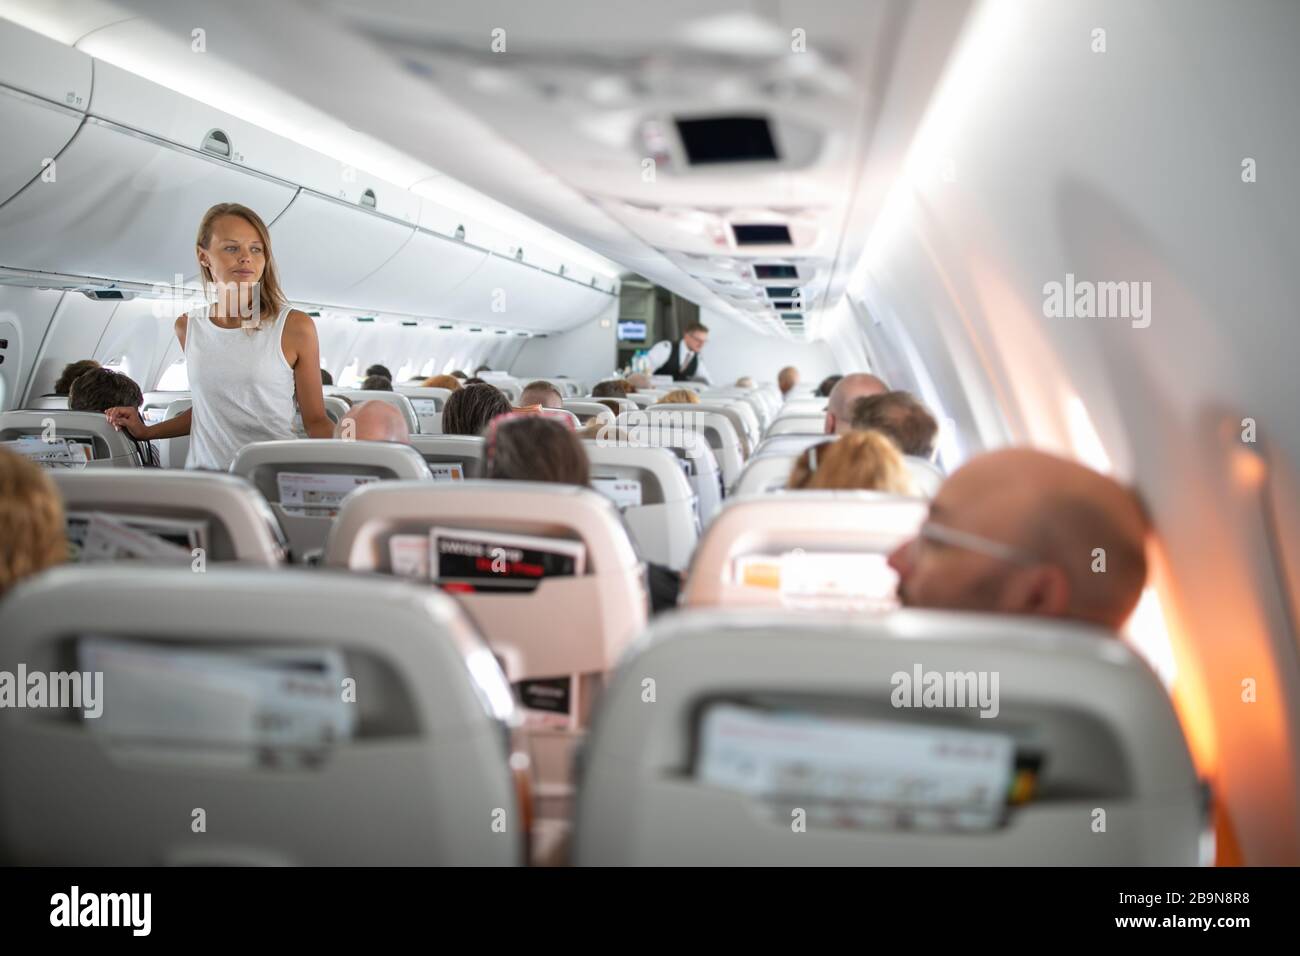 Pretty, young woman aboard an airplane during a lang haul commercial flight - stretching her legs a bit, walking in the aisle Stock Photo